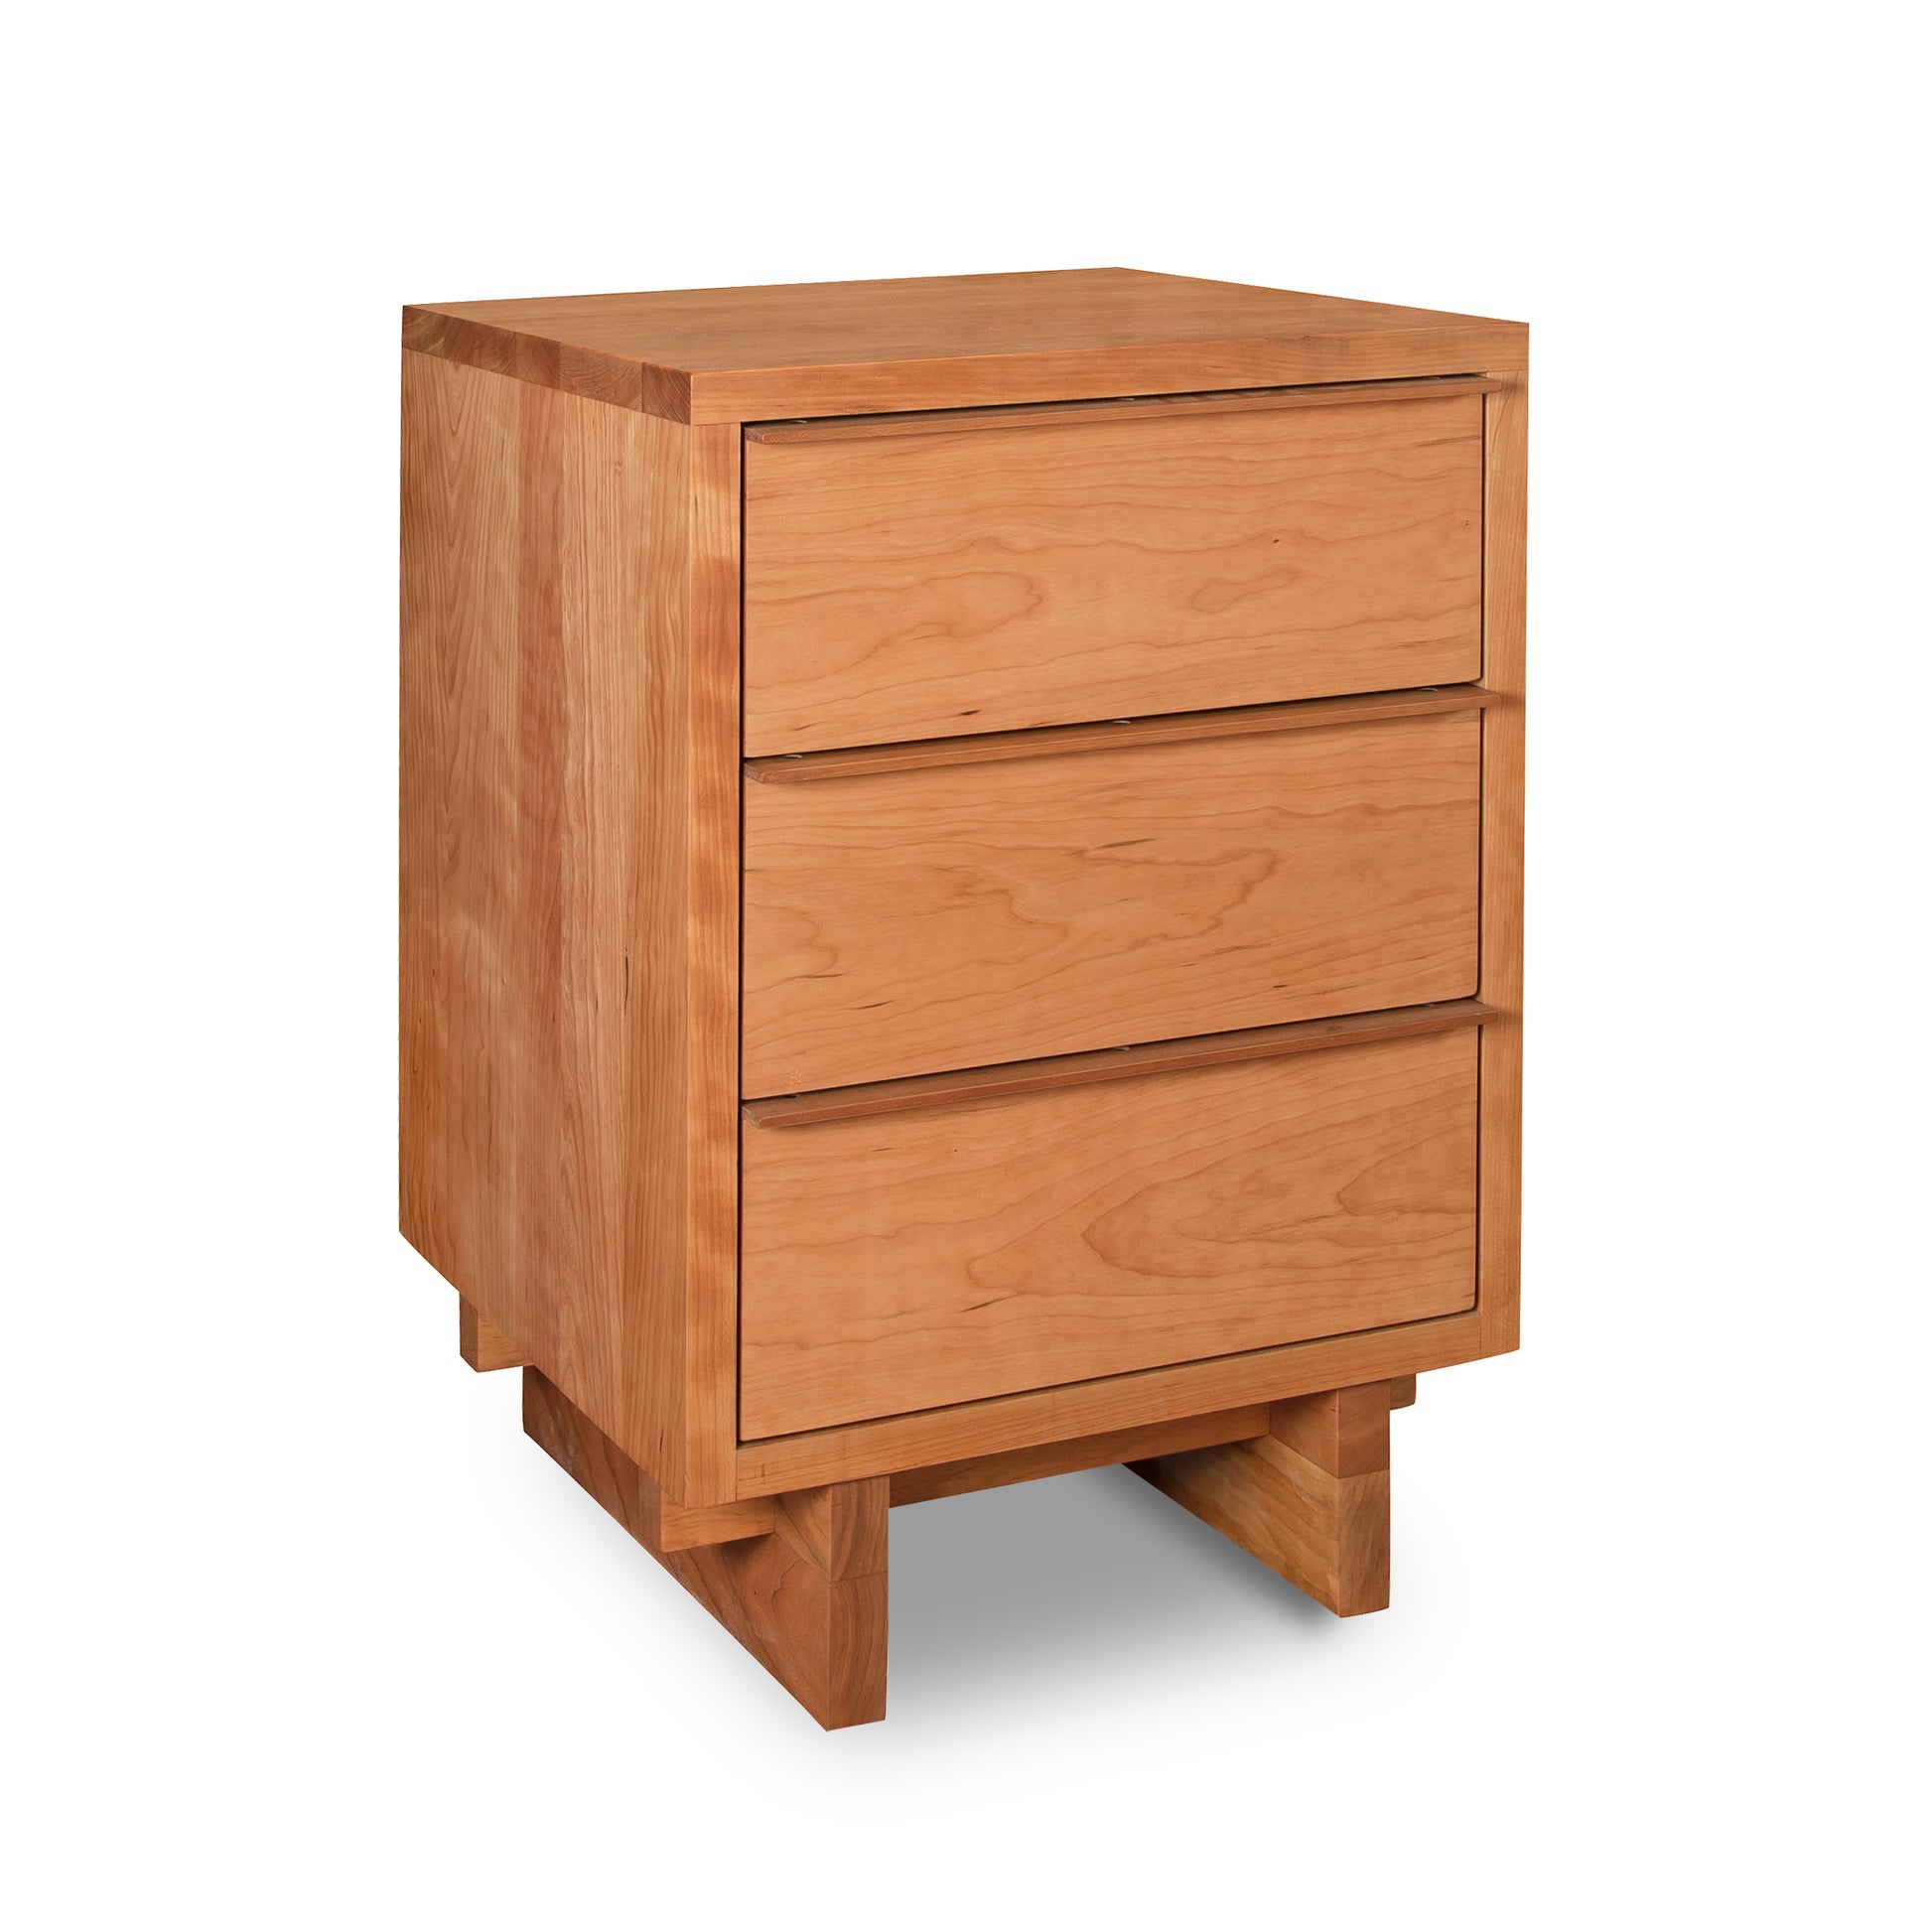 A wooden Vermont Furniture Designs 3-Drawer Nightstand in natural cherry isolated on a white background.